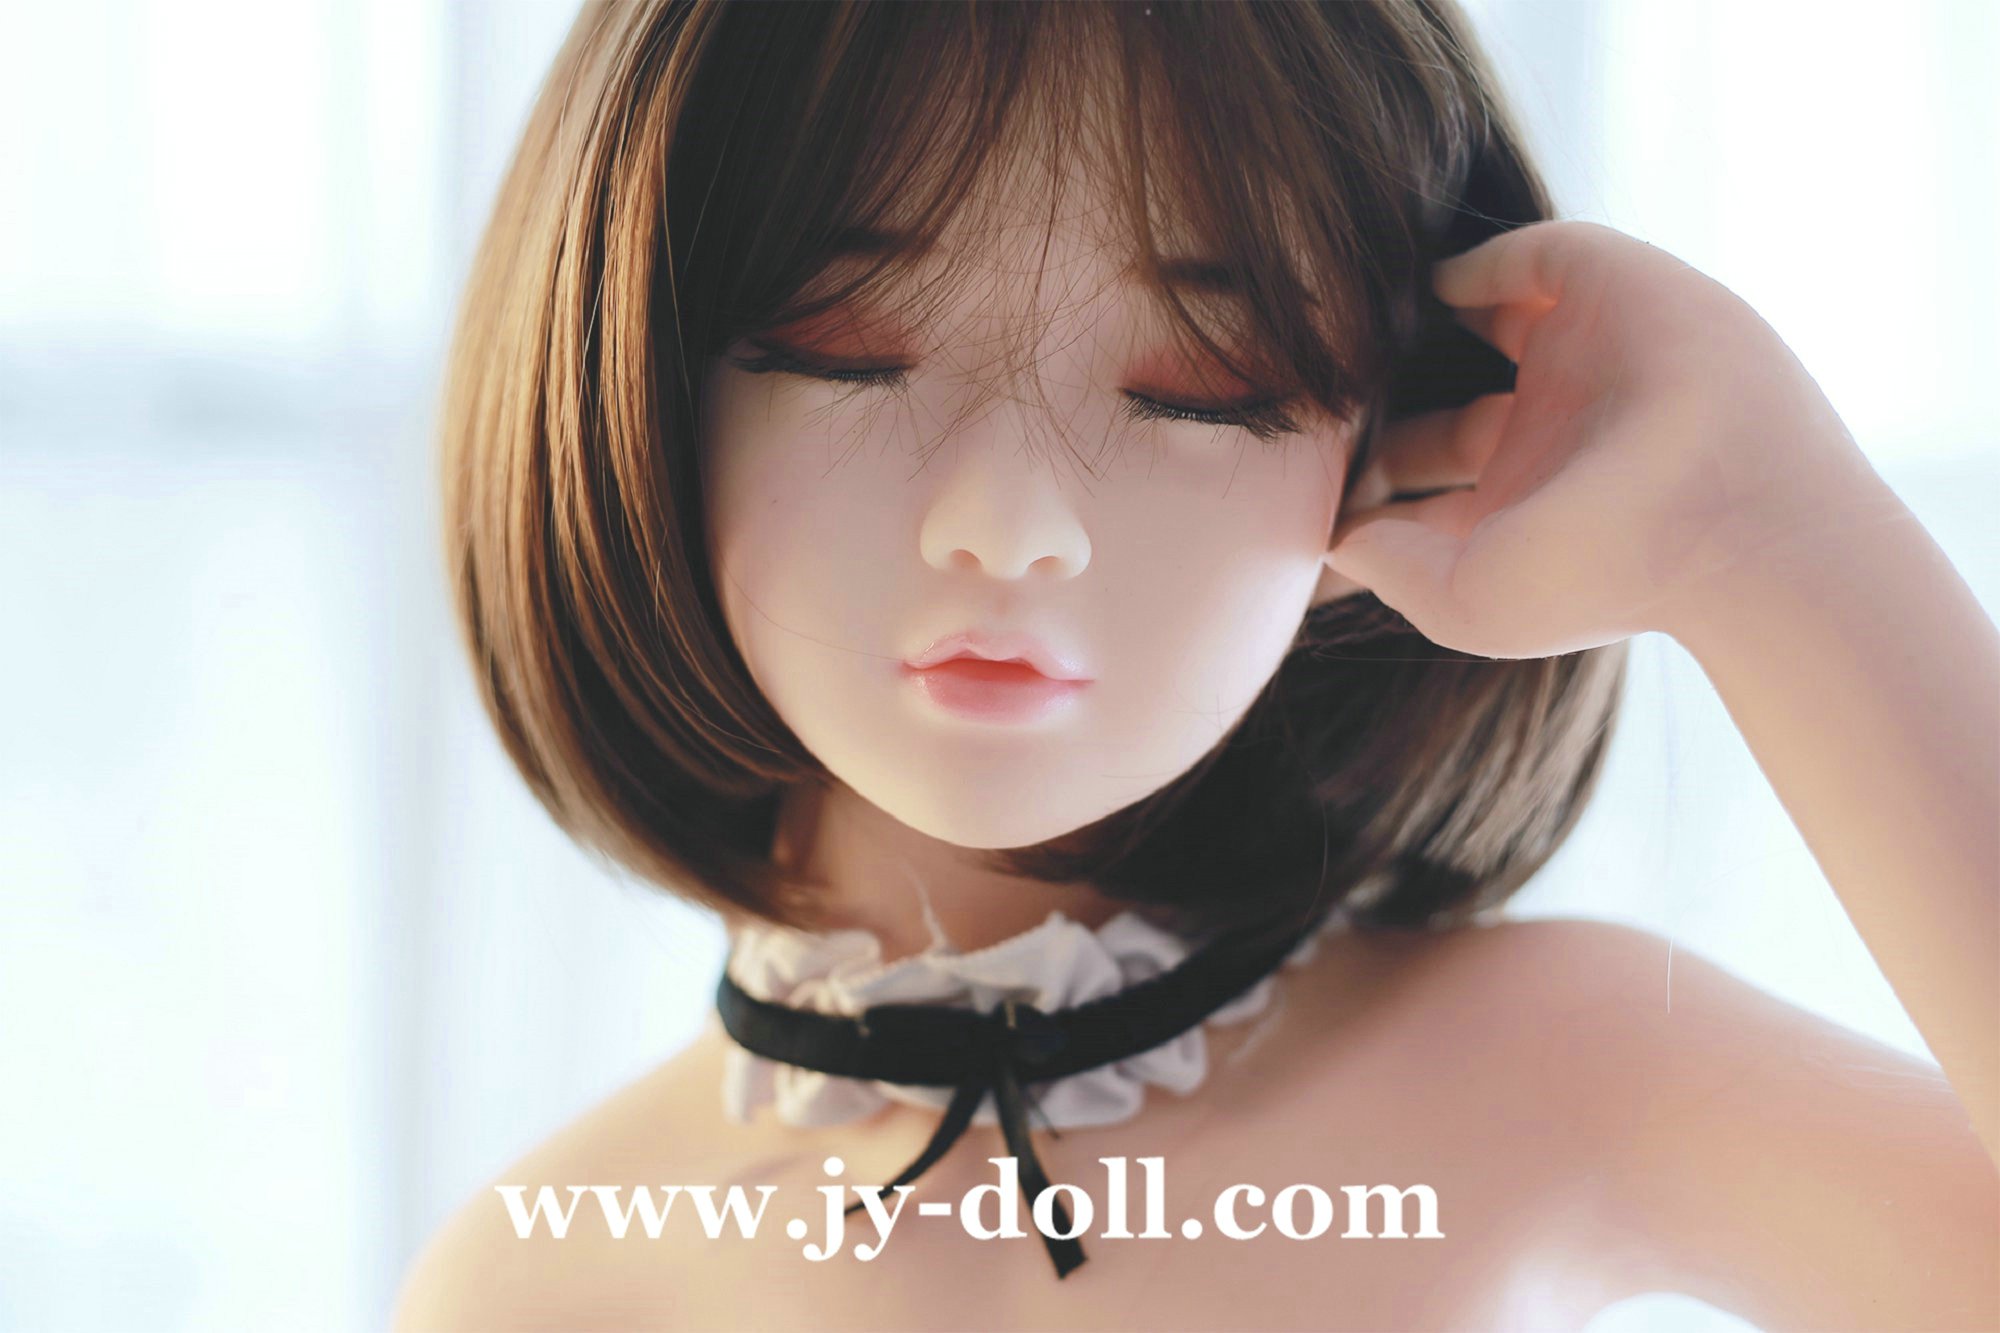 JY DOLL 125CM sex doll Cici with A cup breasts